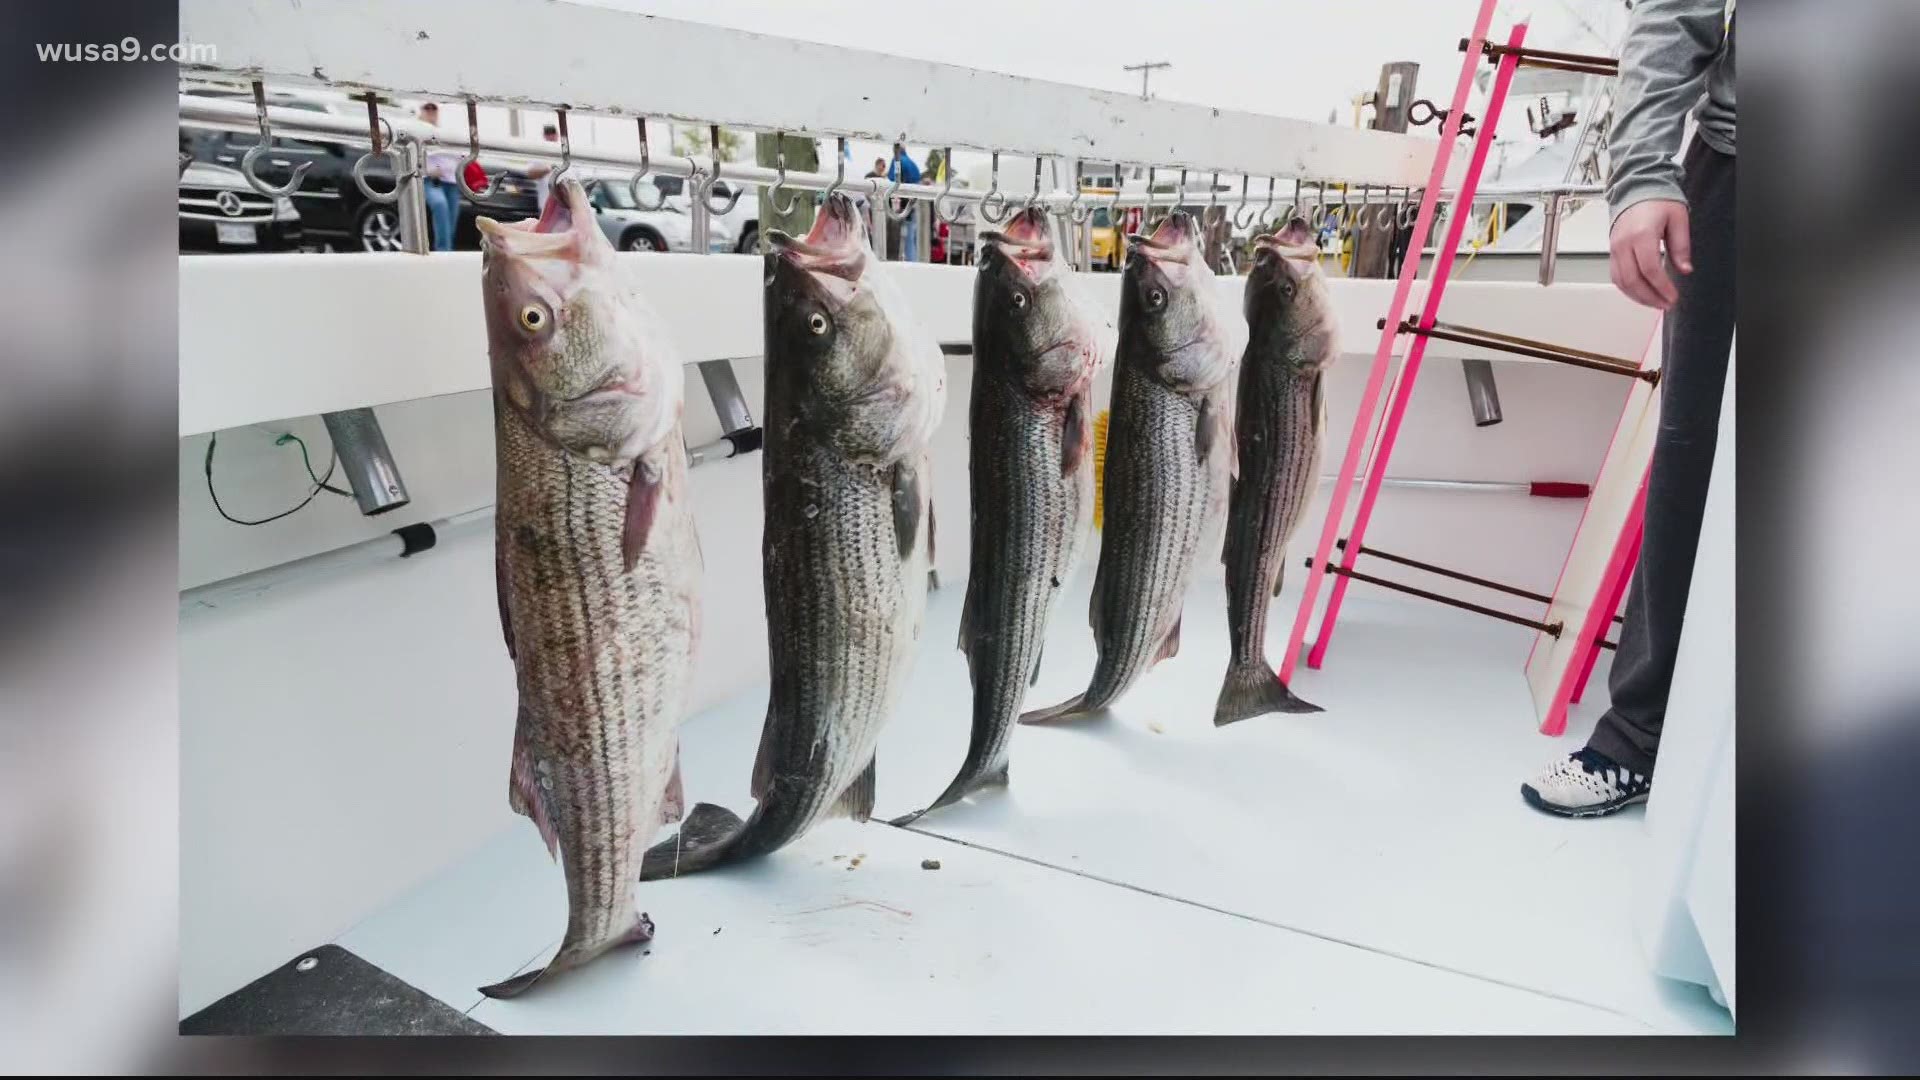 The Maryland Department of Natural Resources (DNR) issued striped bass harvest regulations for recreational anglers and charter boat clients for the summer and fall